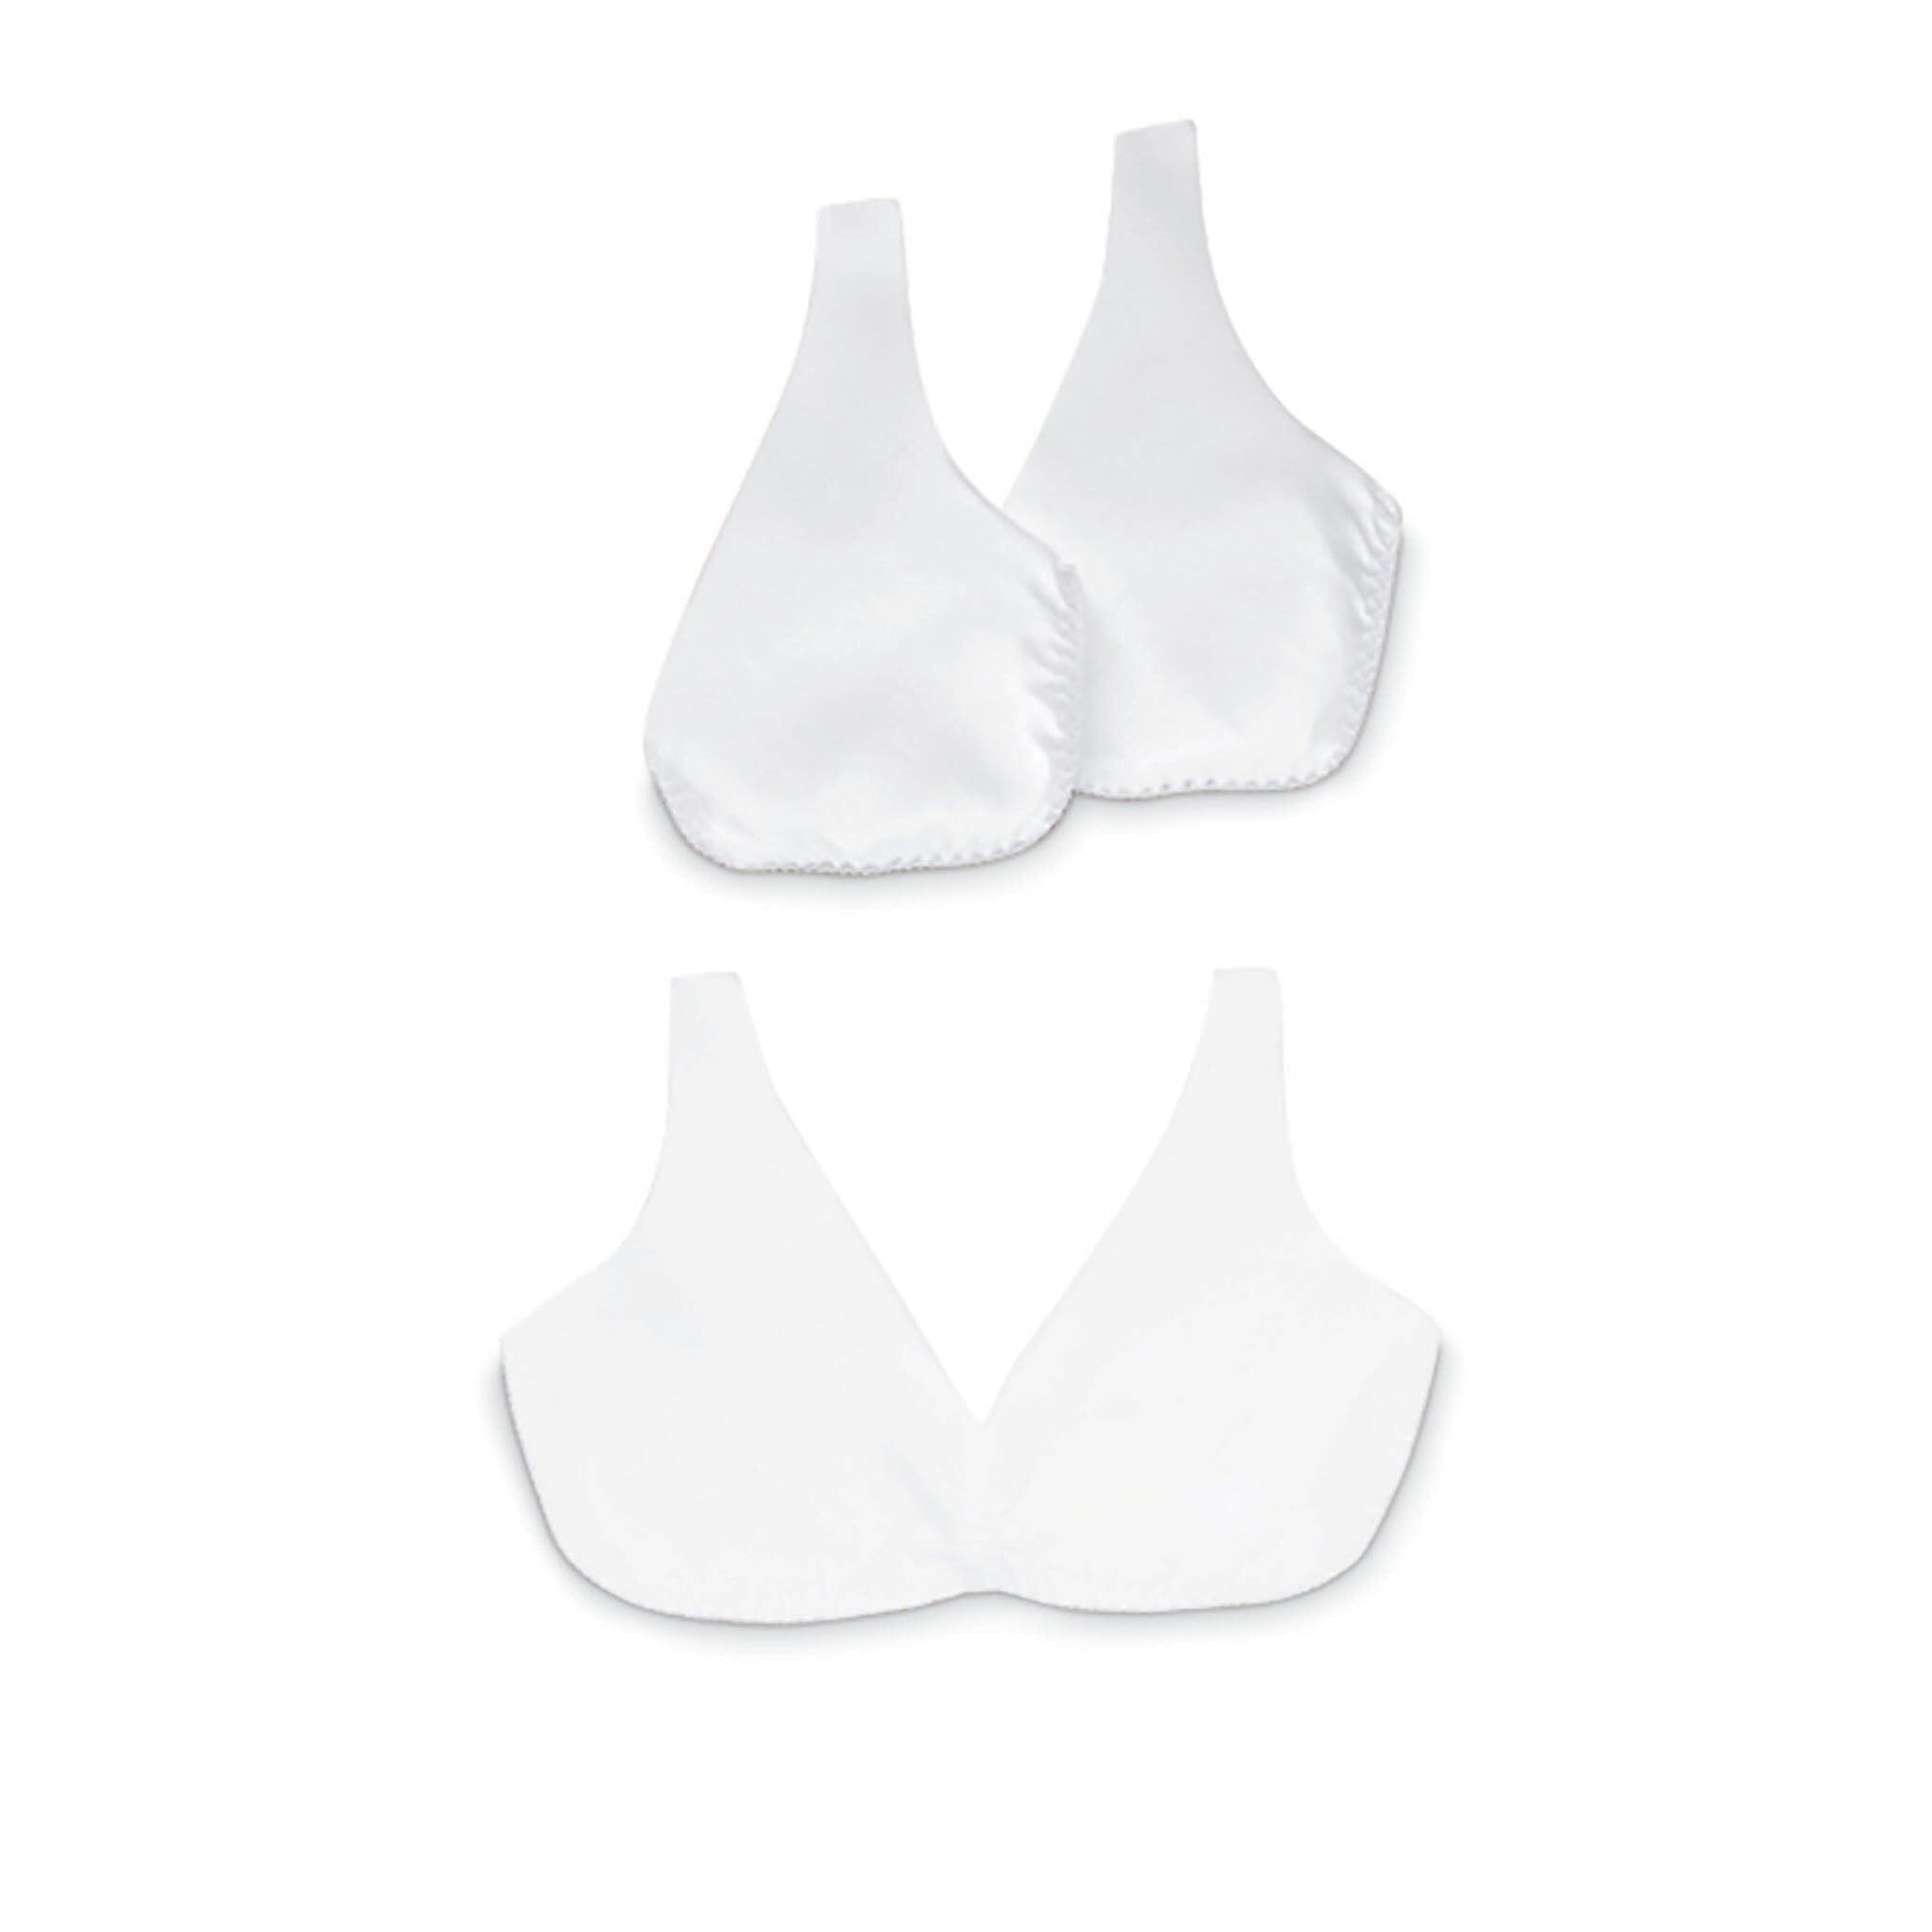 22 Bra Materials for Cup, Lining, Padding, Strap, Hook, Underwire